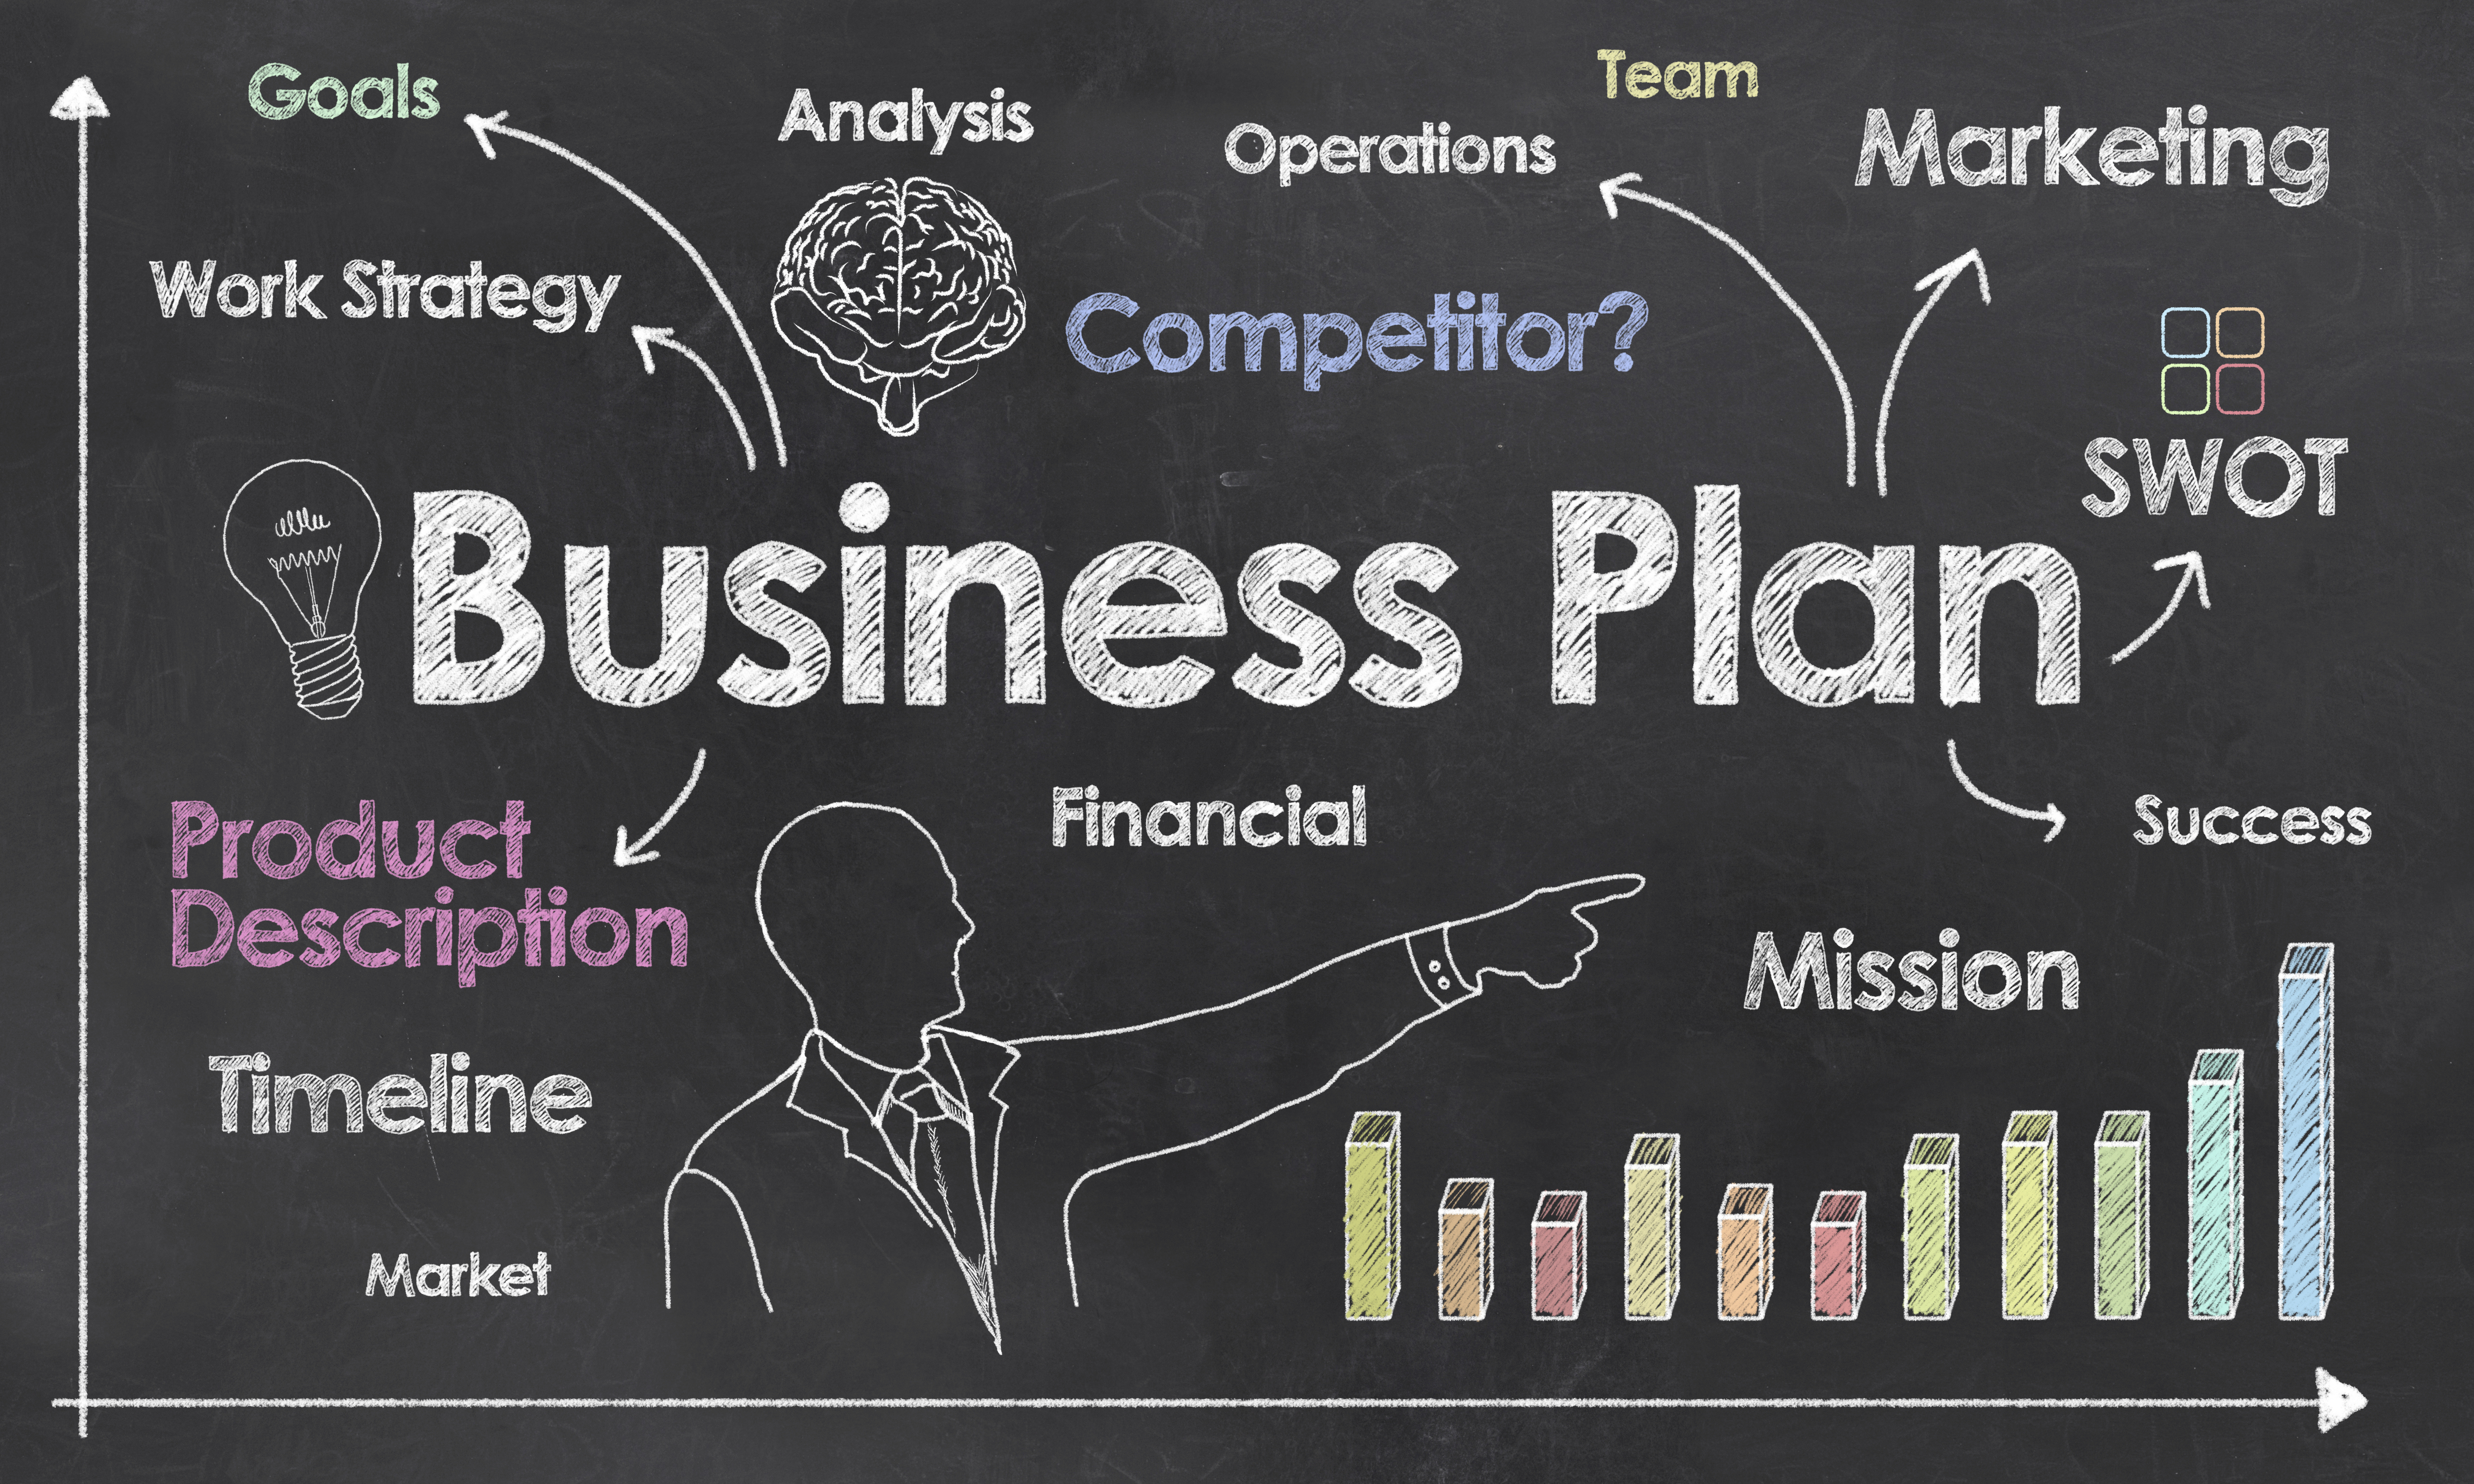 blogger.com - Professional Business Plan Consultants in South Africa